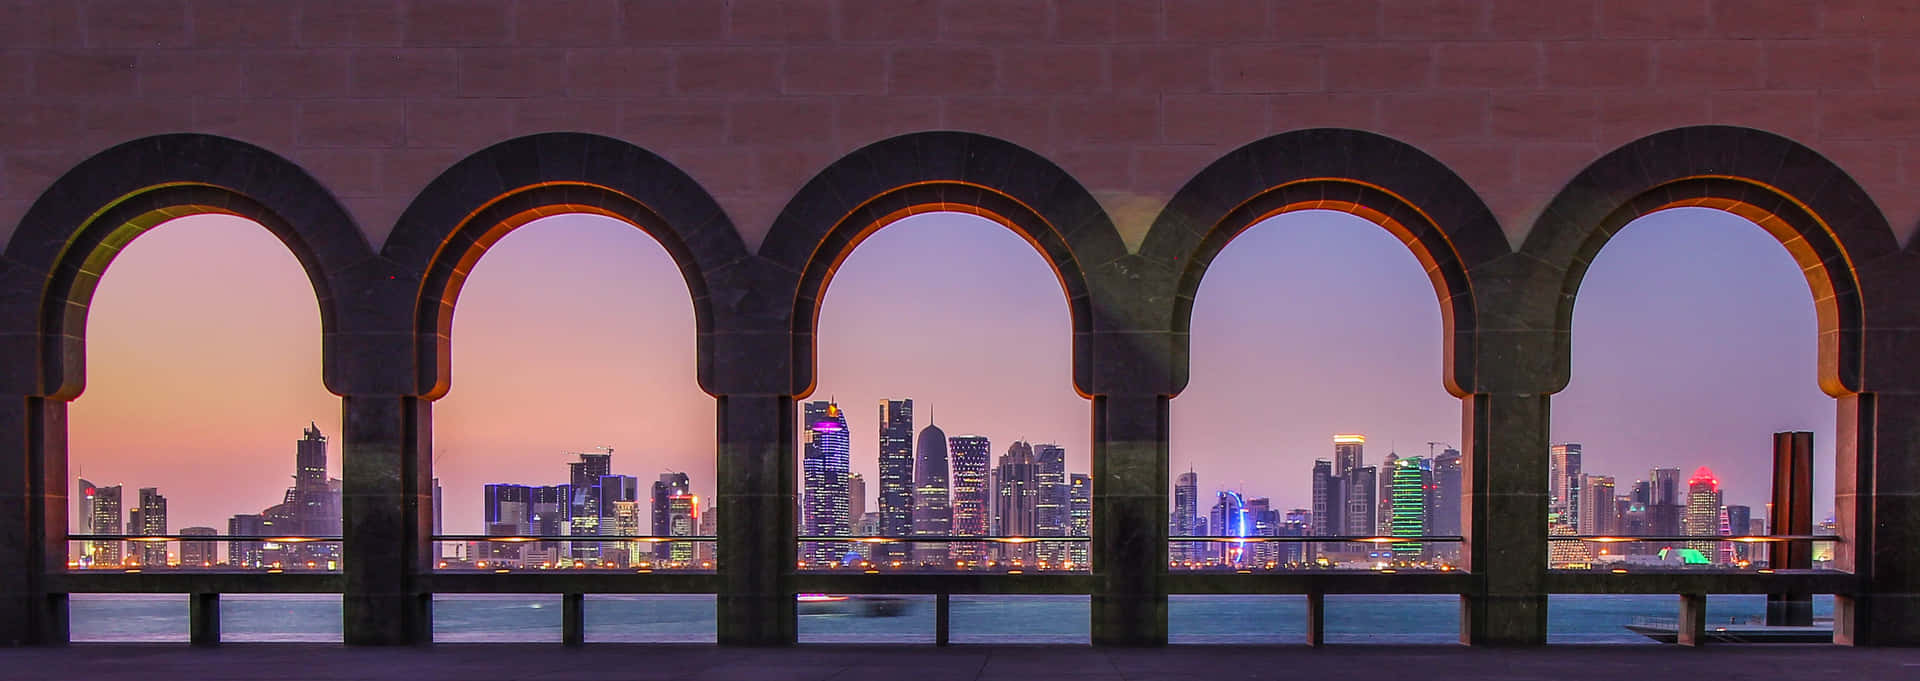 Purple Aesthetic Arches In Museum Of Islamic Art Wallpaper